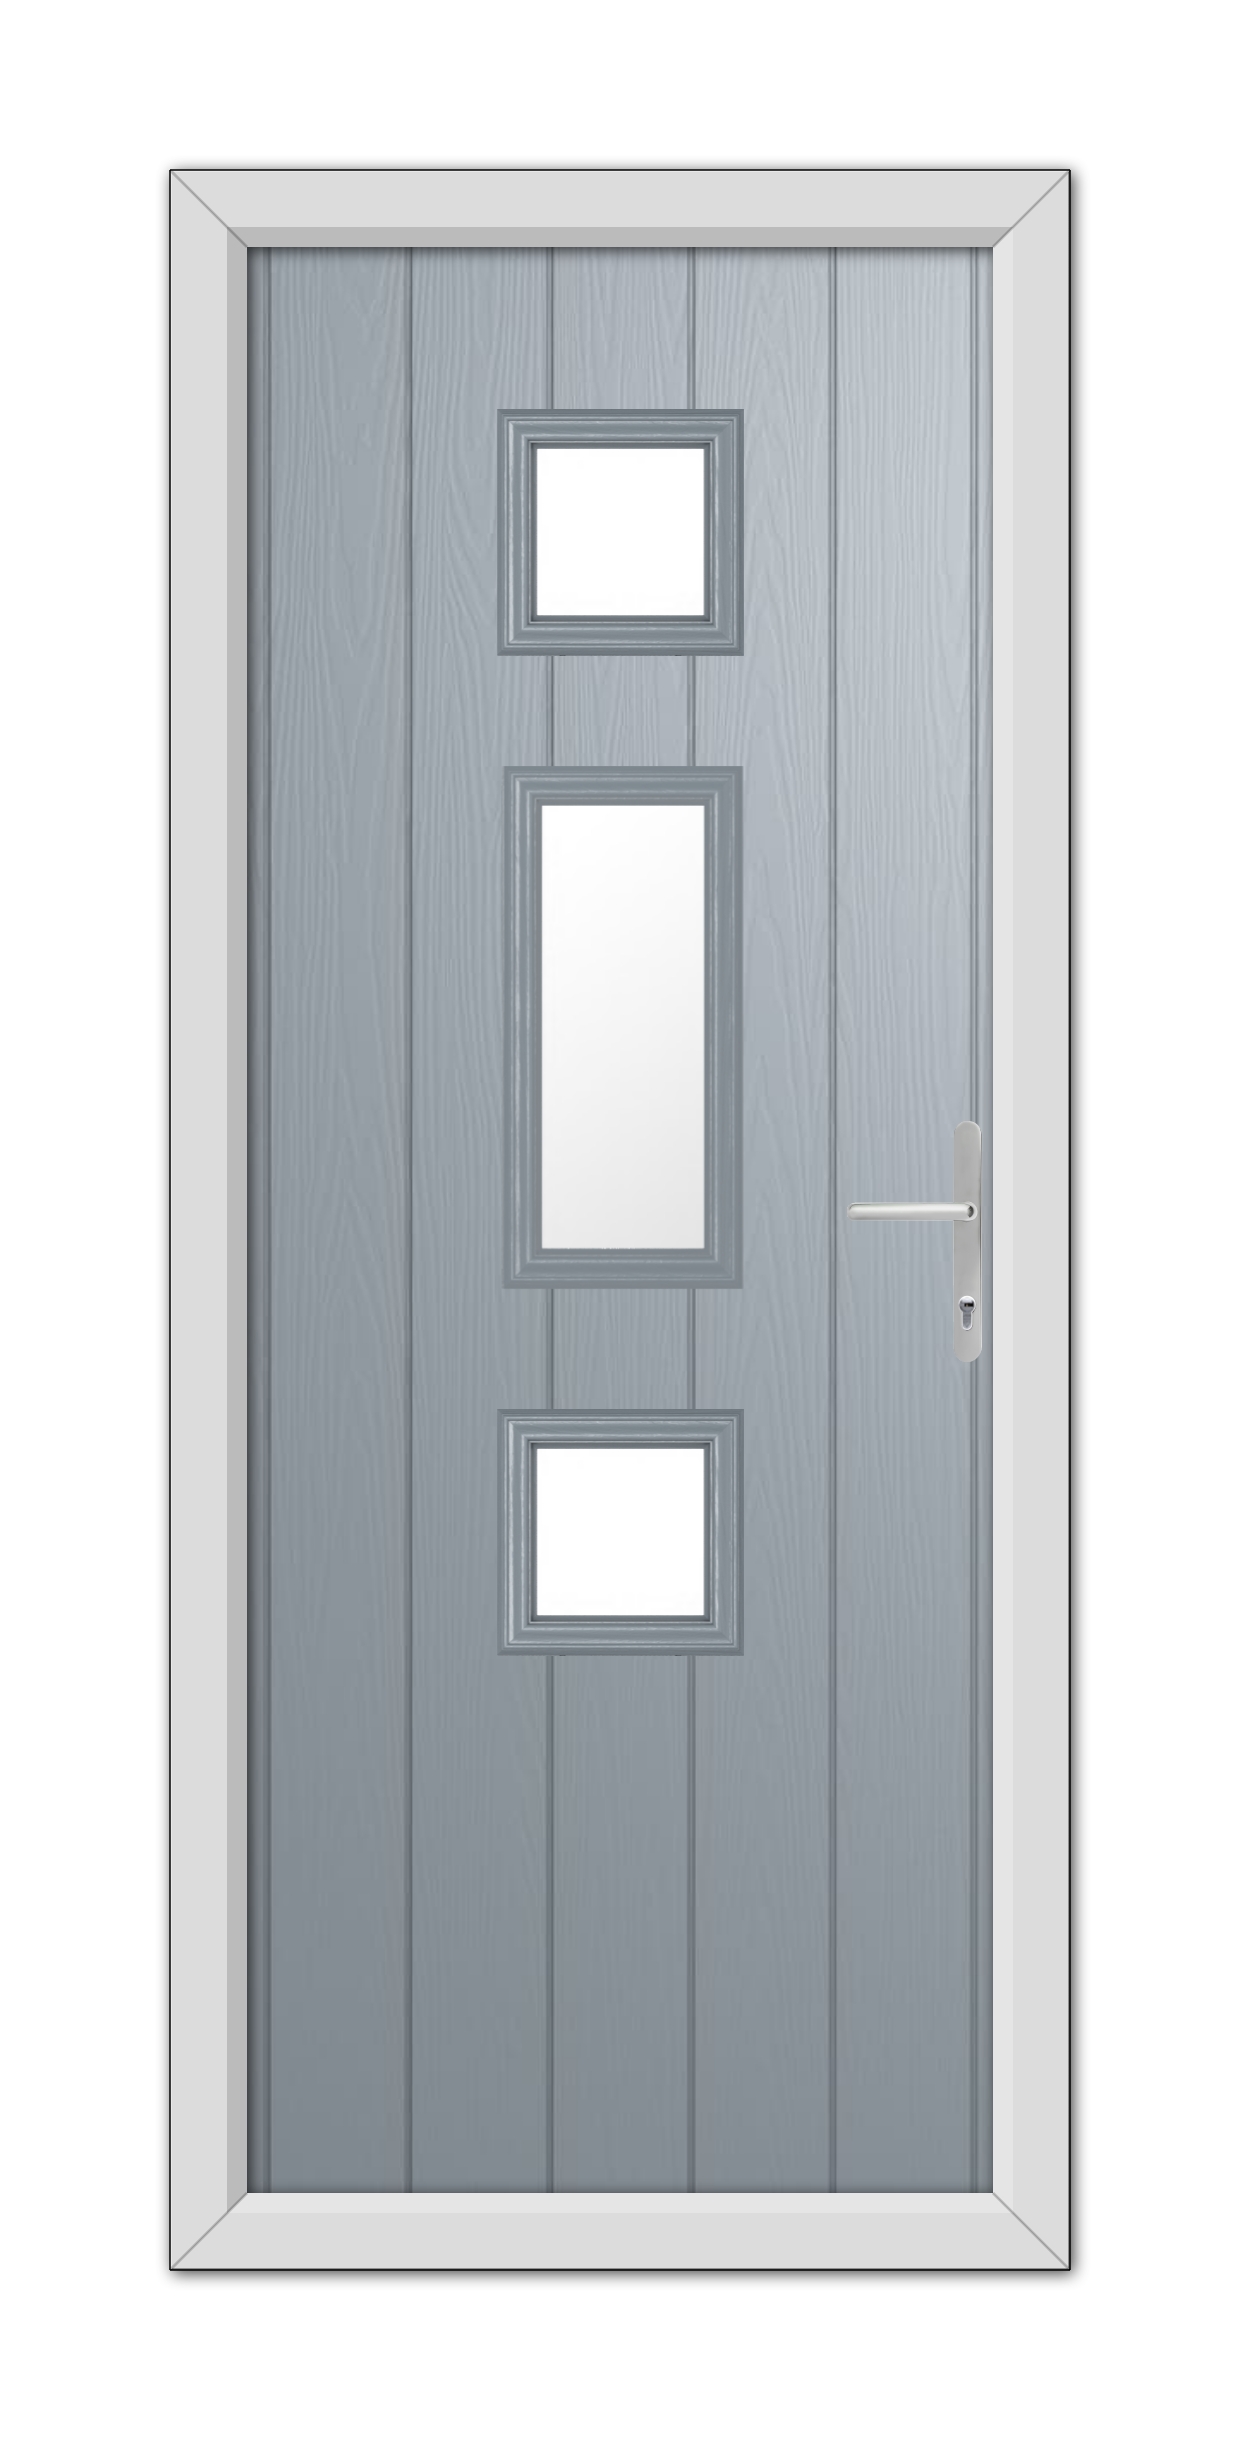 A modern French Grey York Composite Door 48mm Timber Core with three vertical glass panels and a metallic handle, set within a white door frame.